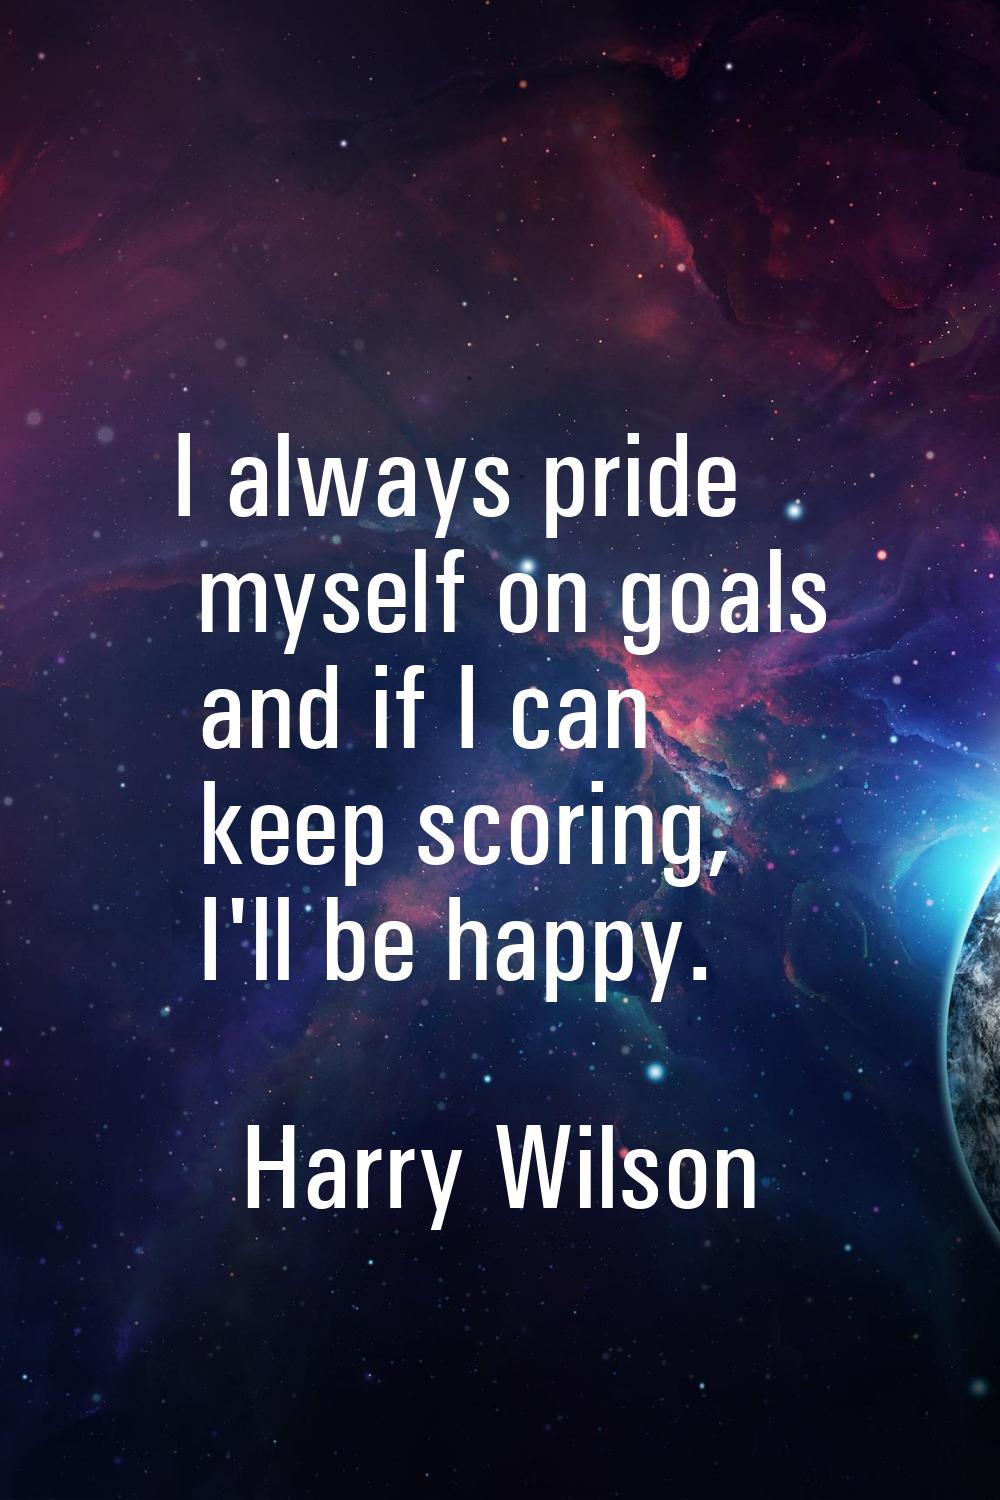 I always pride myself on goals and if I can keep scoring, I'll be happy.